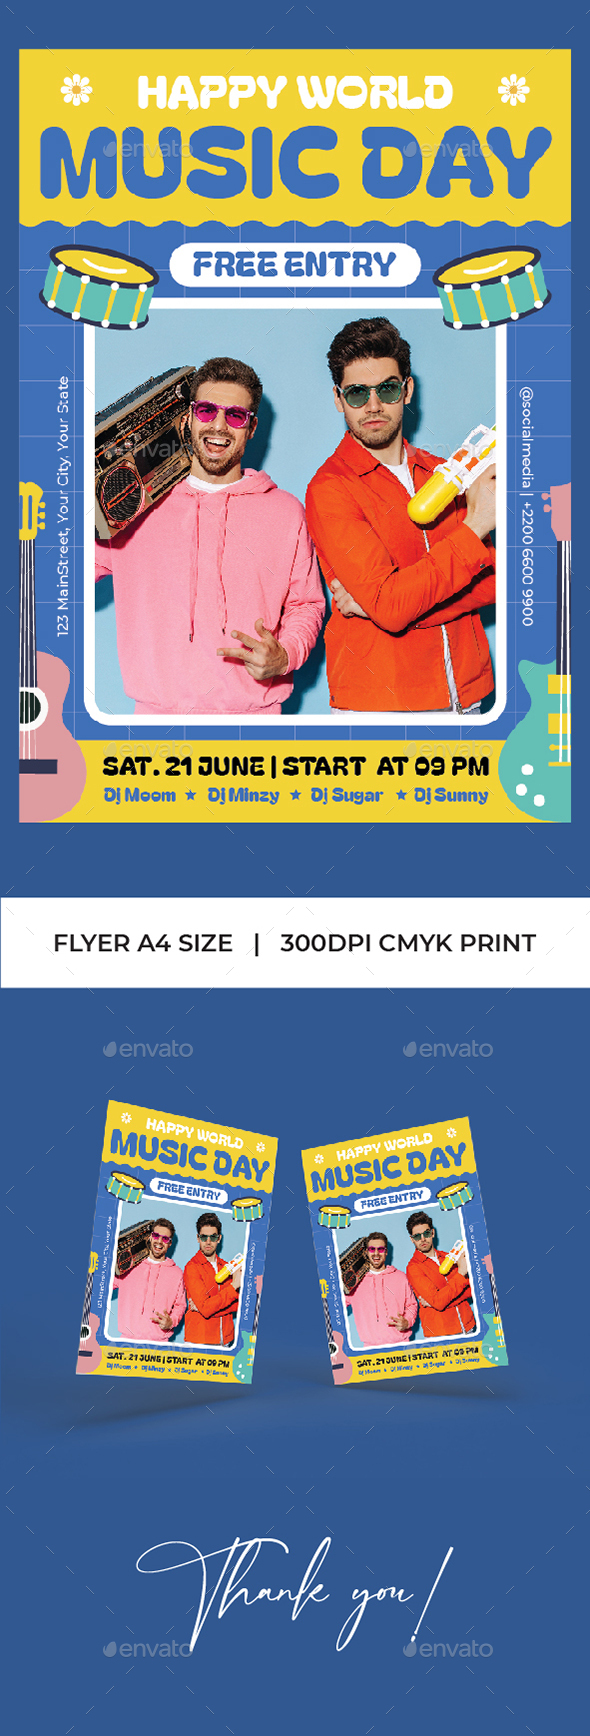 [DOWNLOAD]Music Day Flyer